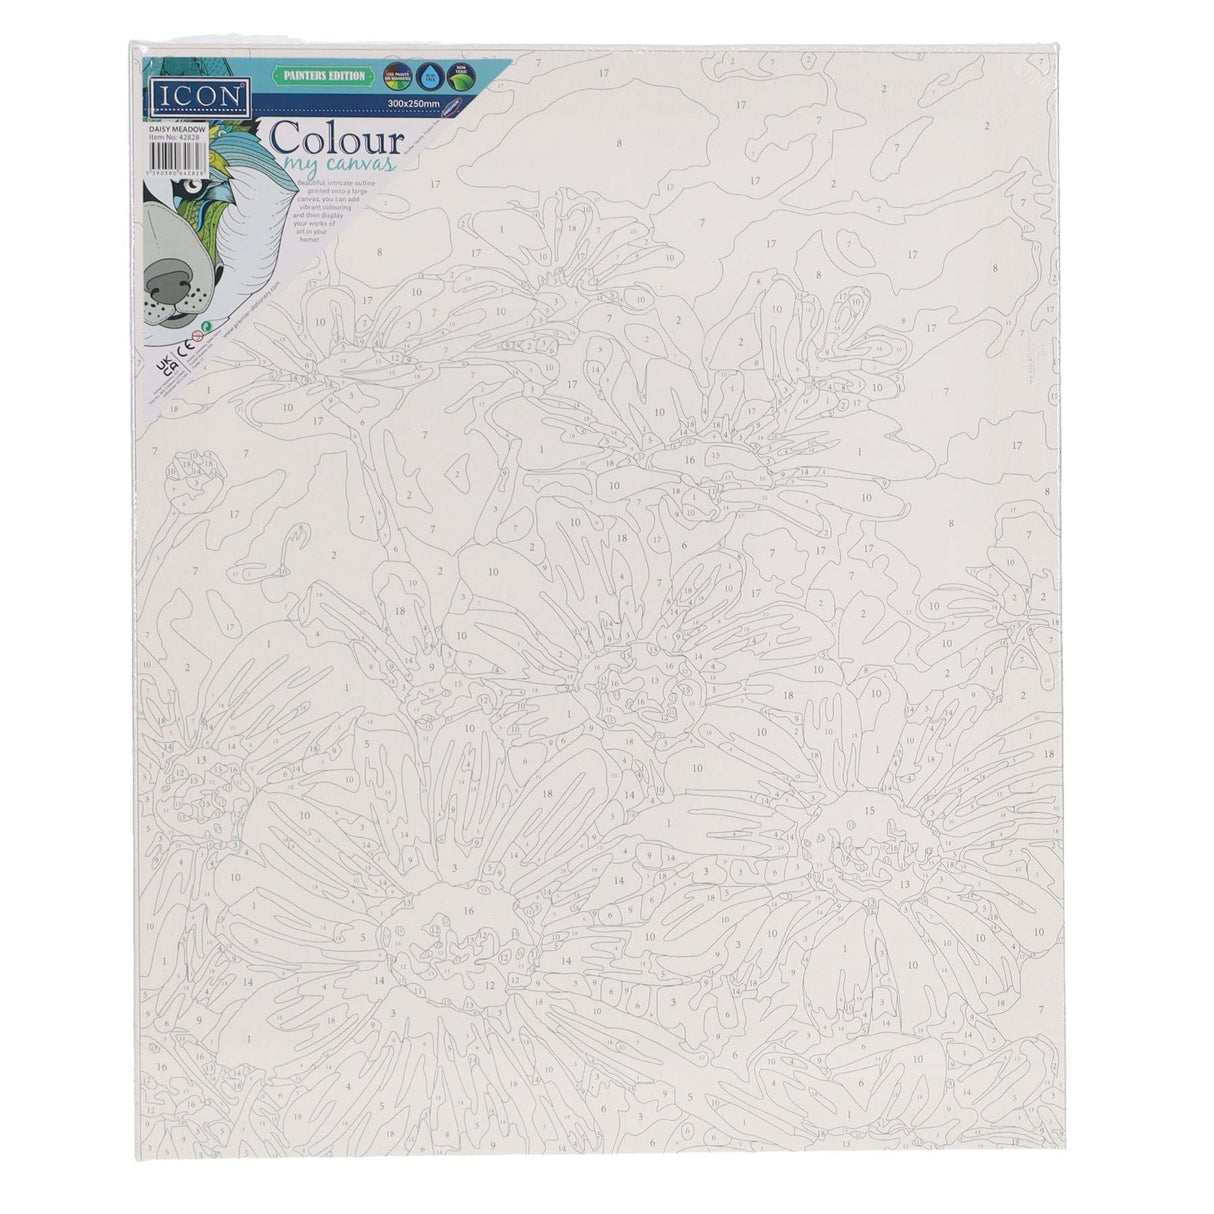 Icon Paint By Numbers Canvas - 300x250mm - Daisy Meadow-Colour-in Canvas-Icon | Buy Online at Stationery Shop